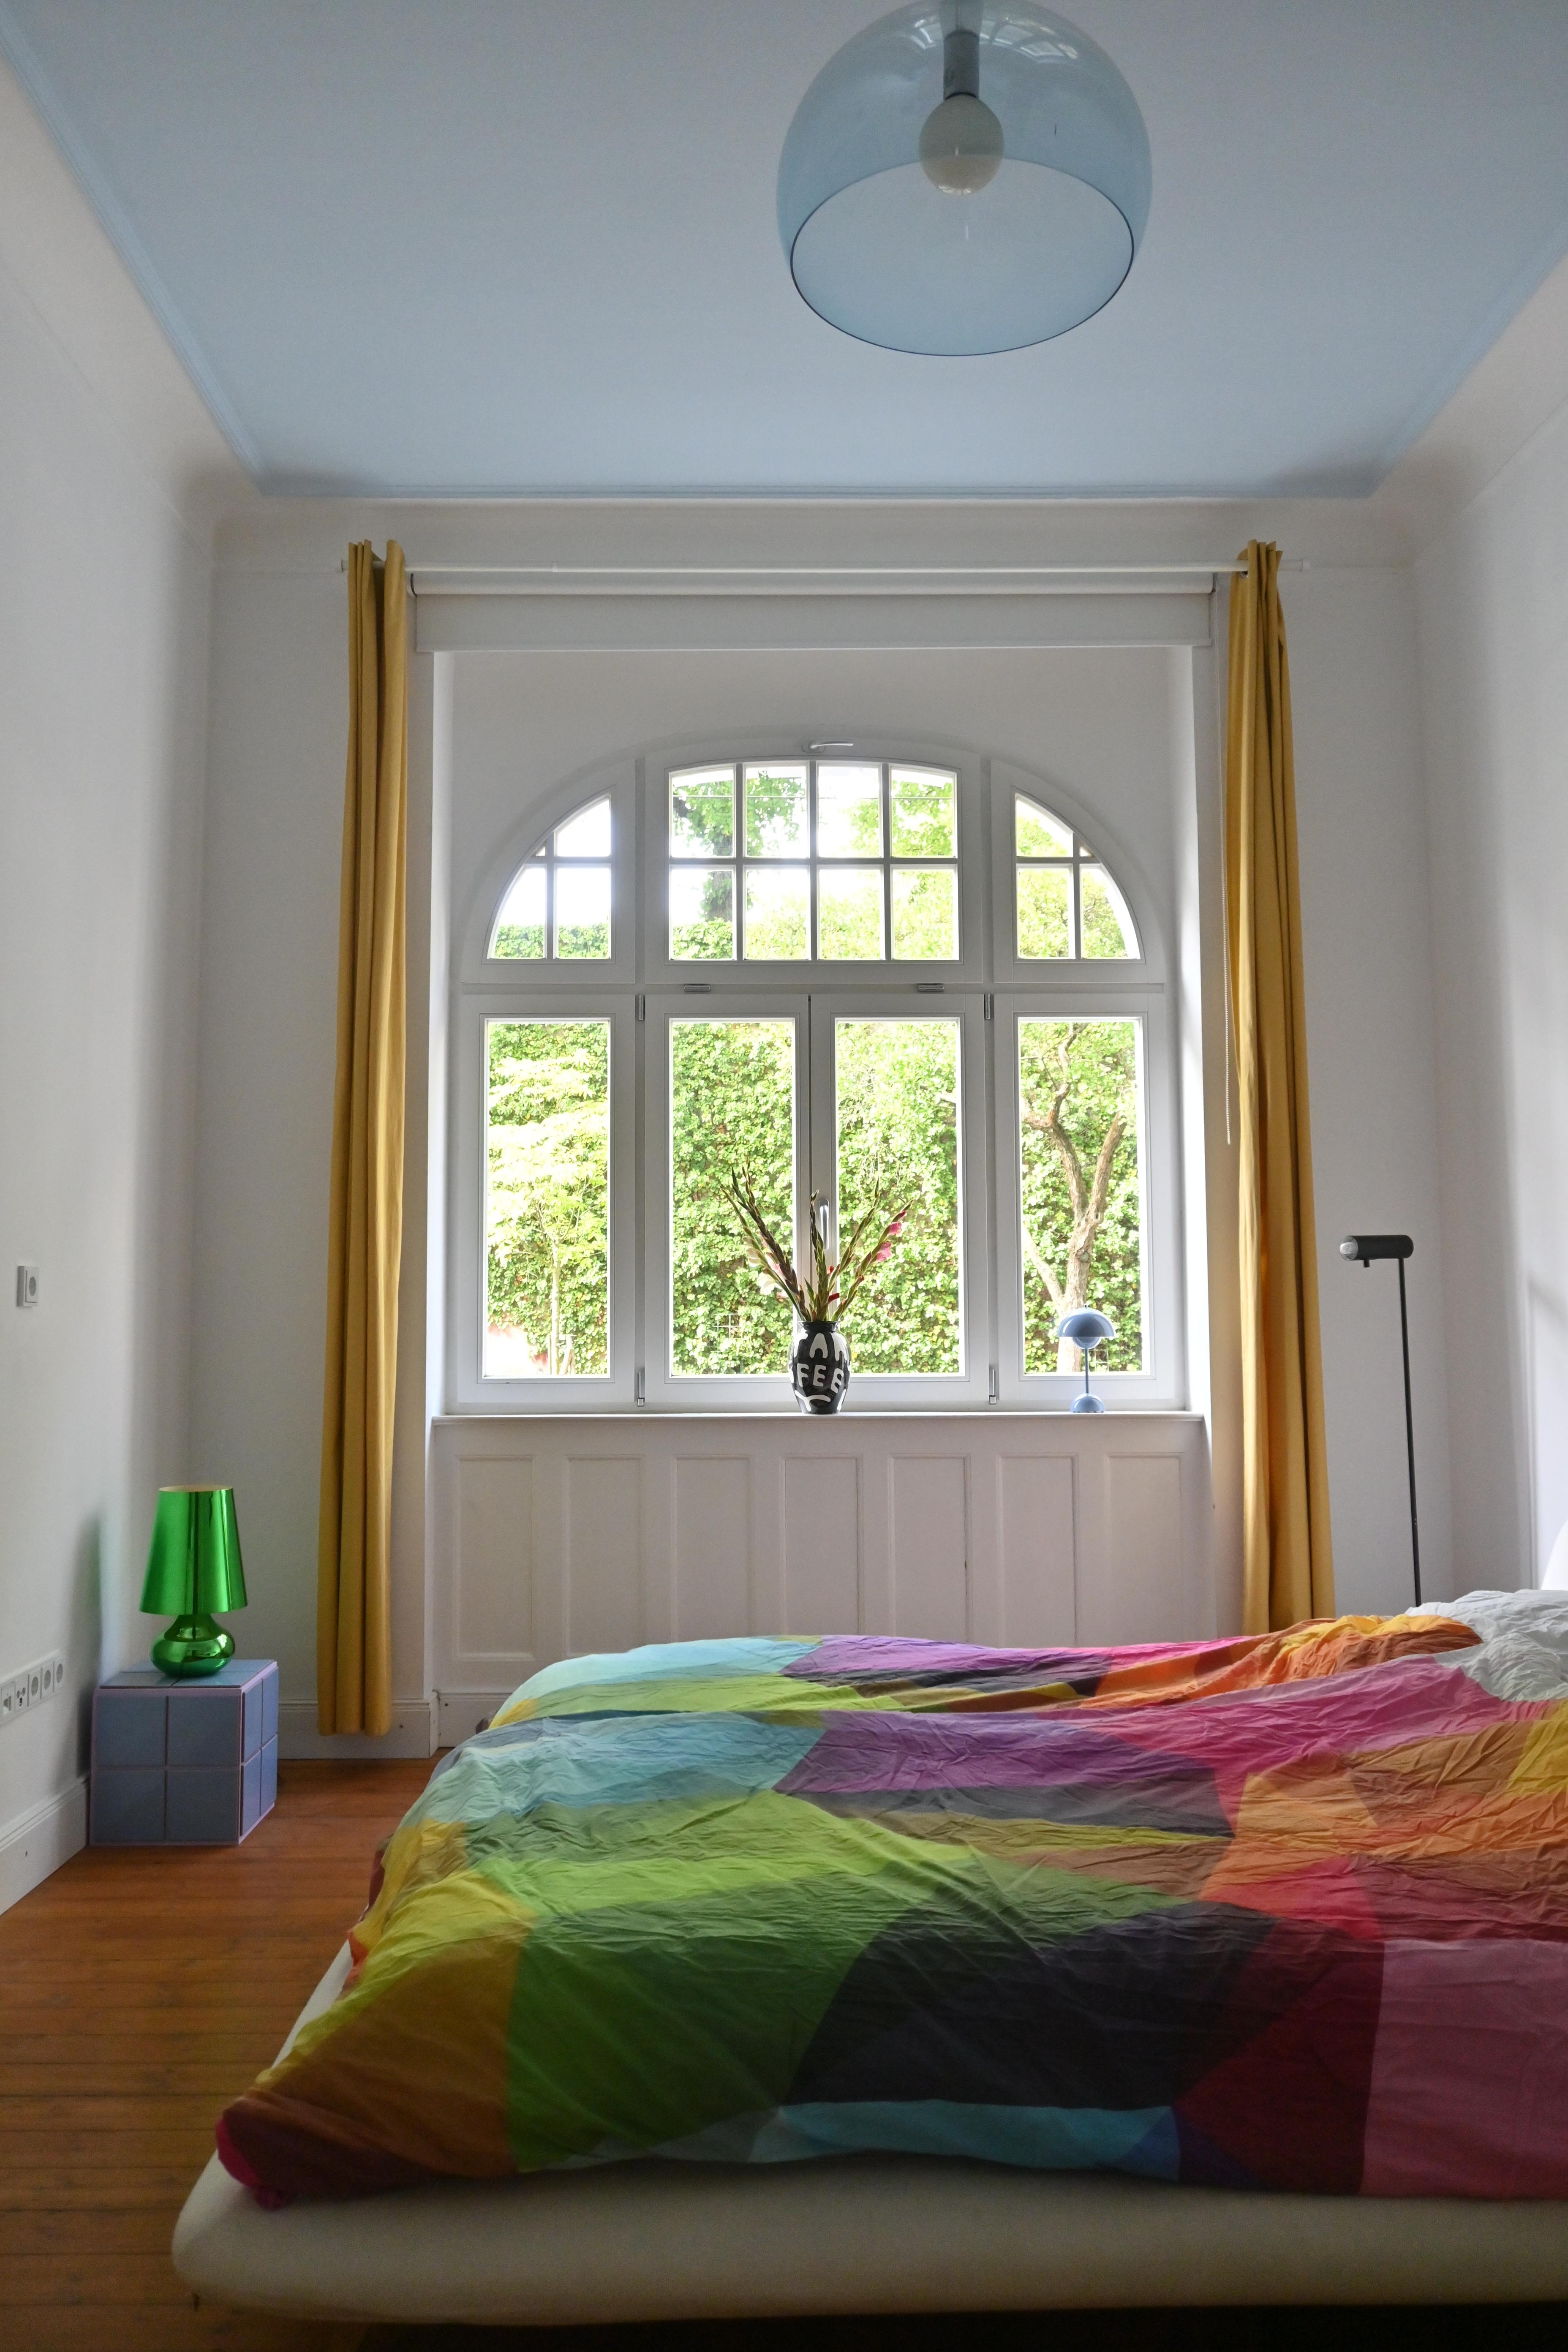 Farbenfrohe Träume
#livingchallenge #schlafzimmer #colorfulhome #colorsmakesmehappy